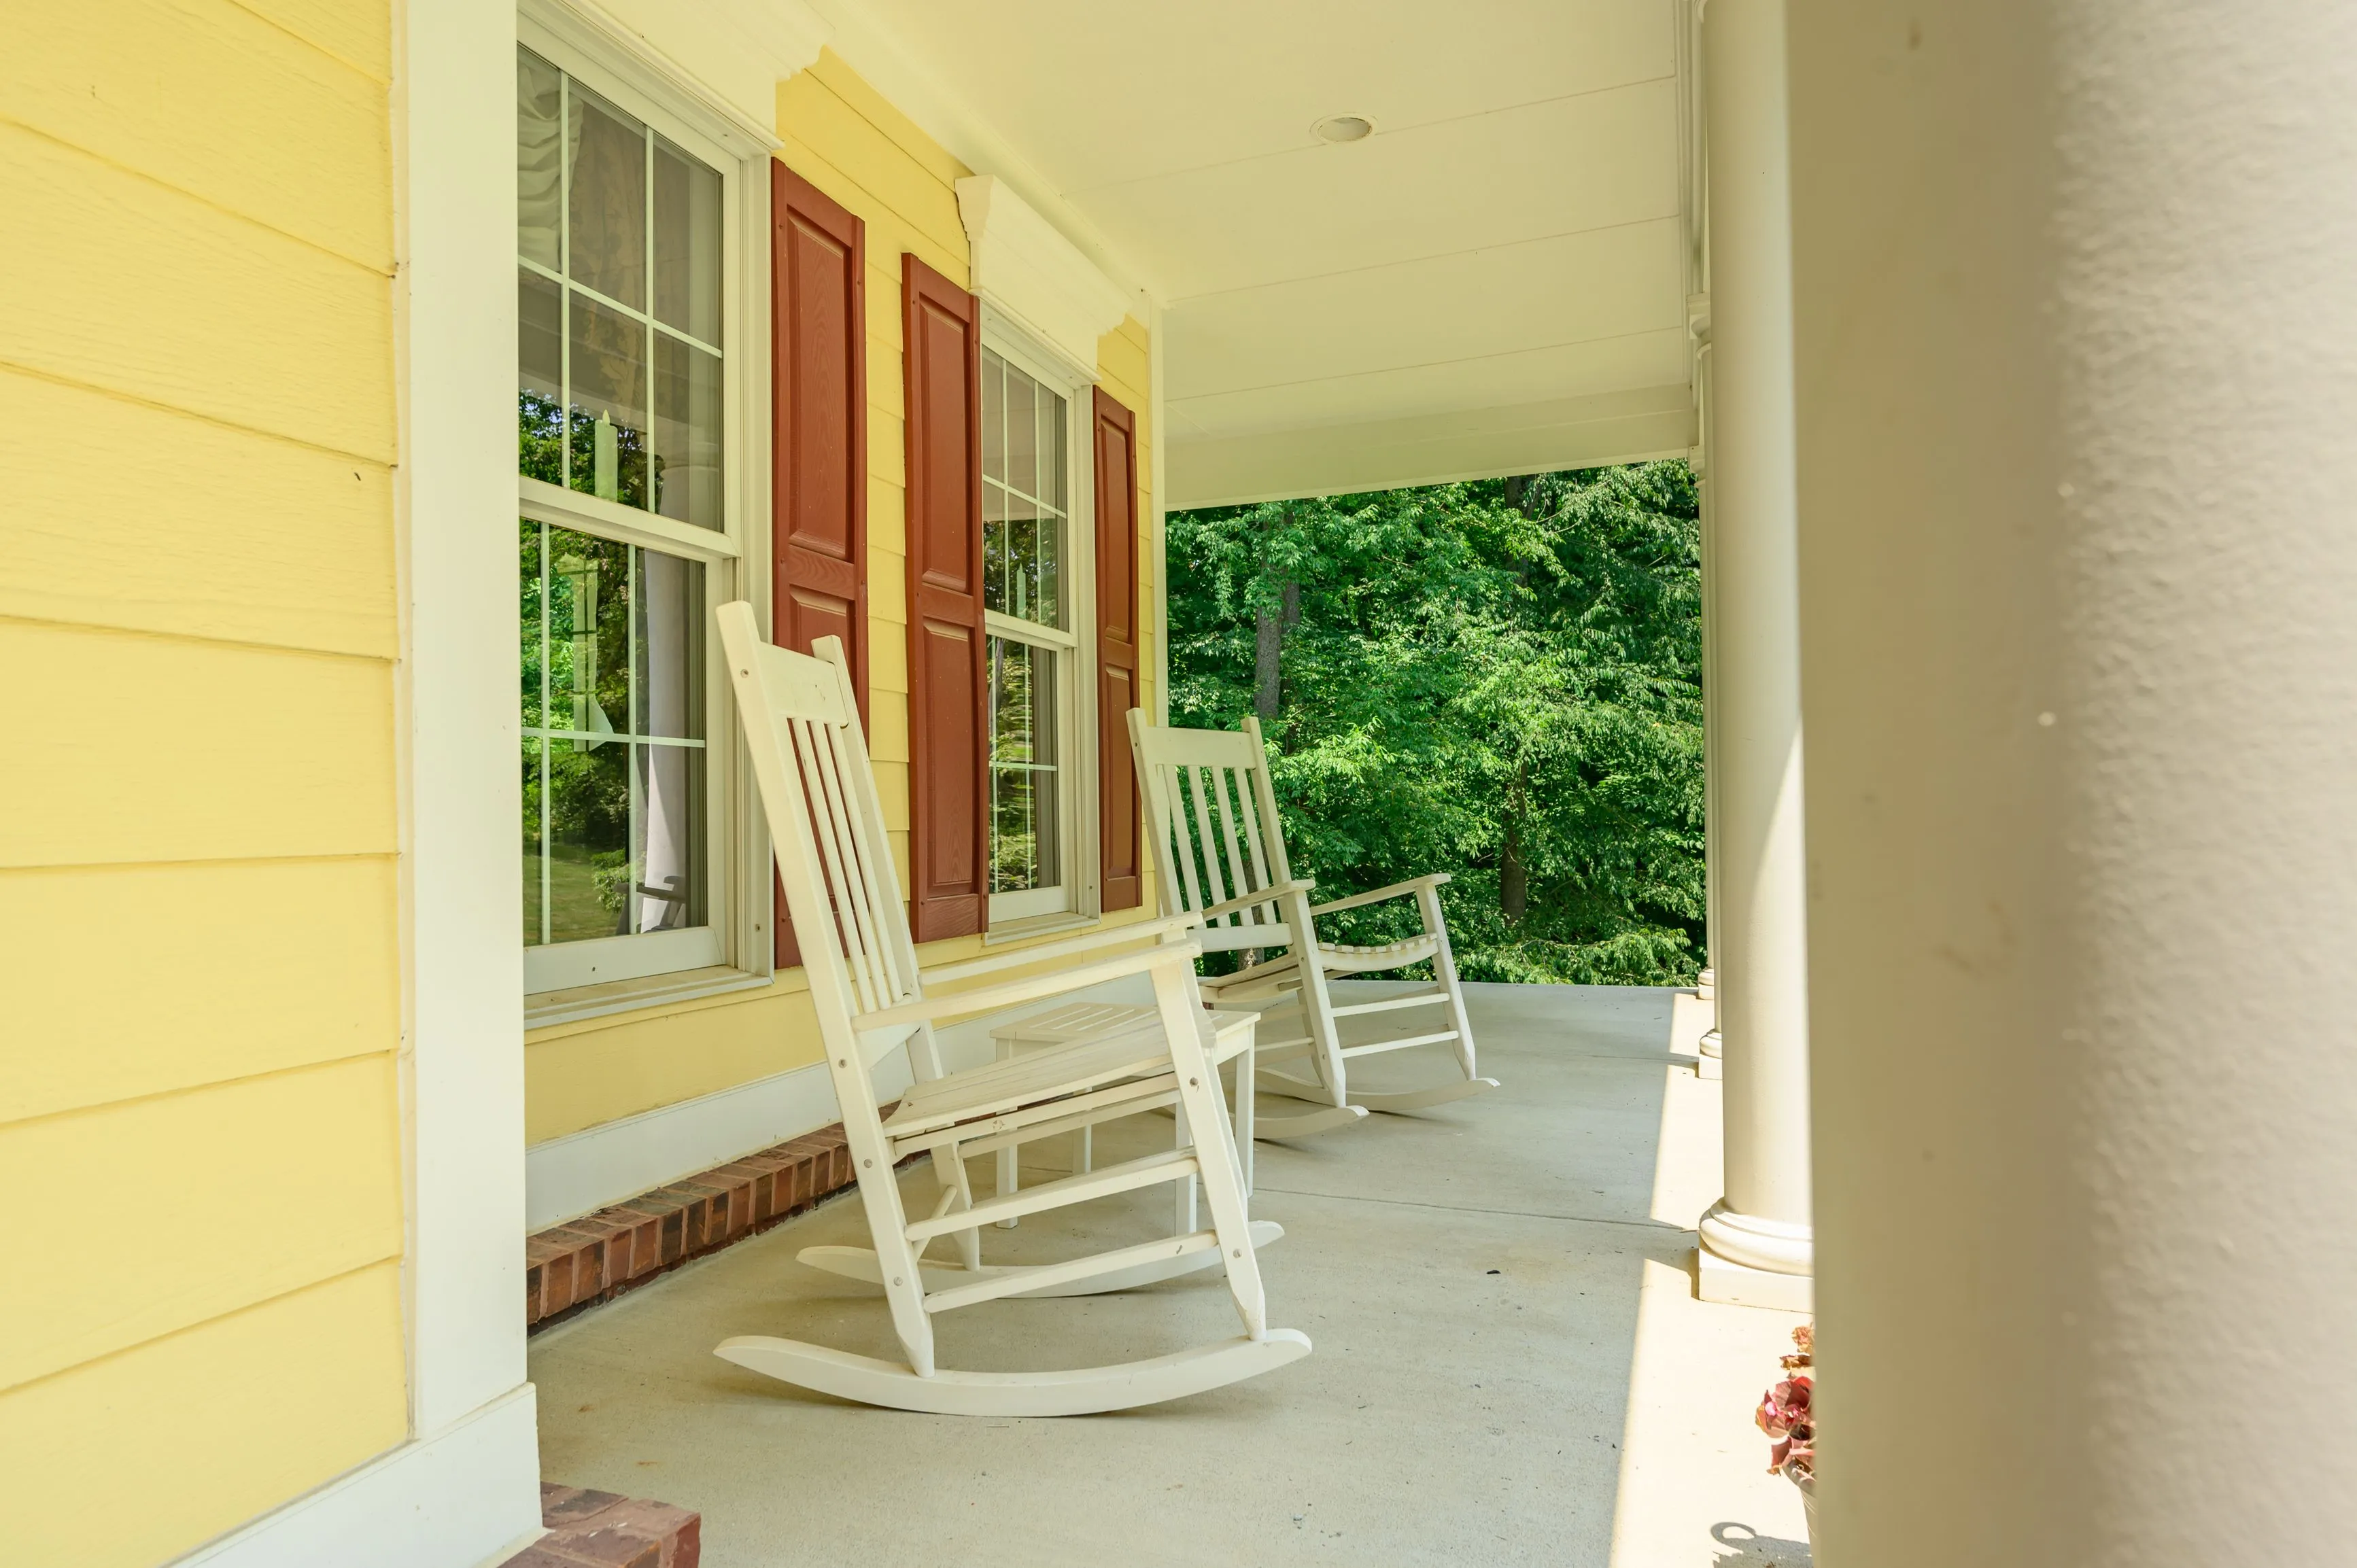  A sunny porch with two white rocking chairs, red shutters on the windows, and a view of green bushes and trees.